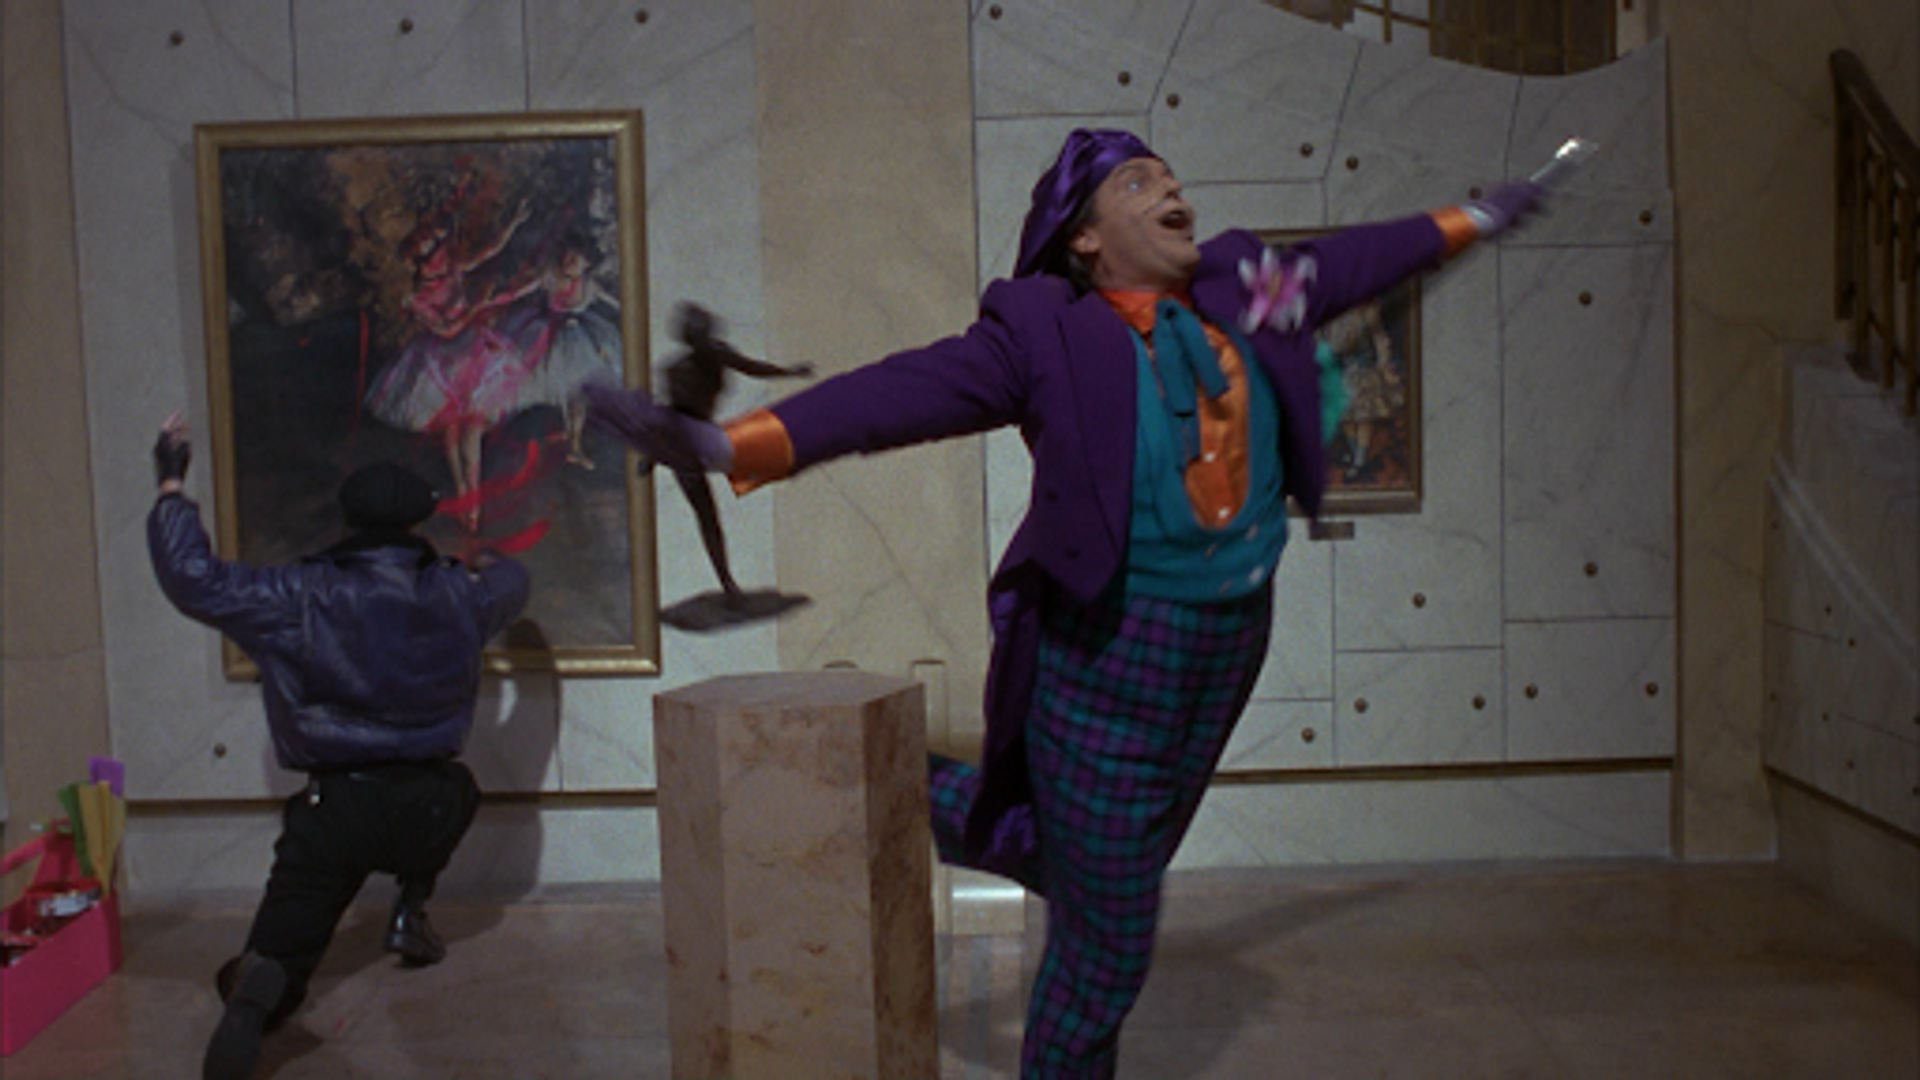 Photograph of Batman film set. Man spreading out his arms with his leg up in the air in an art gallery. 